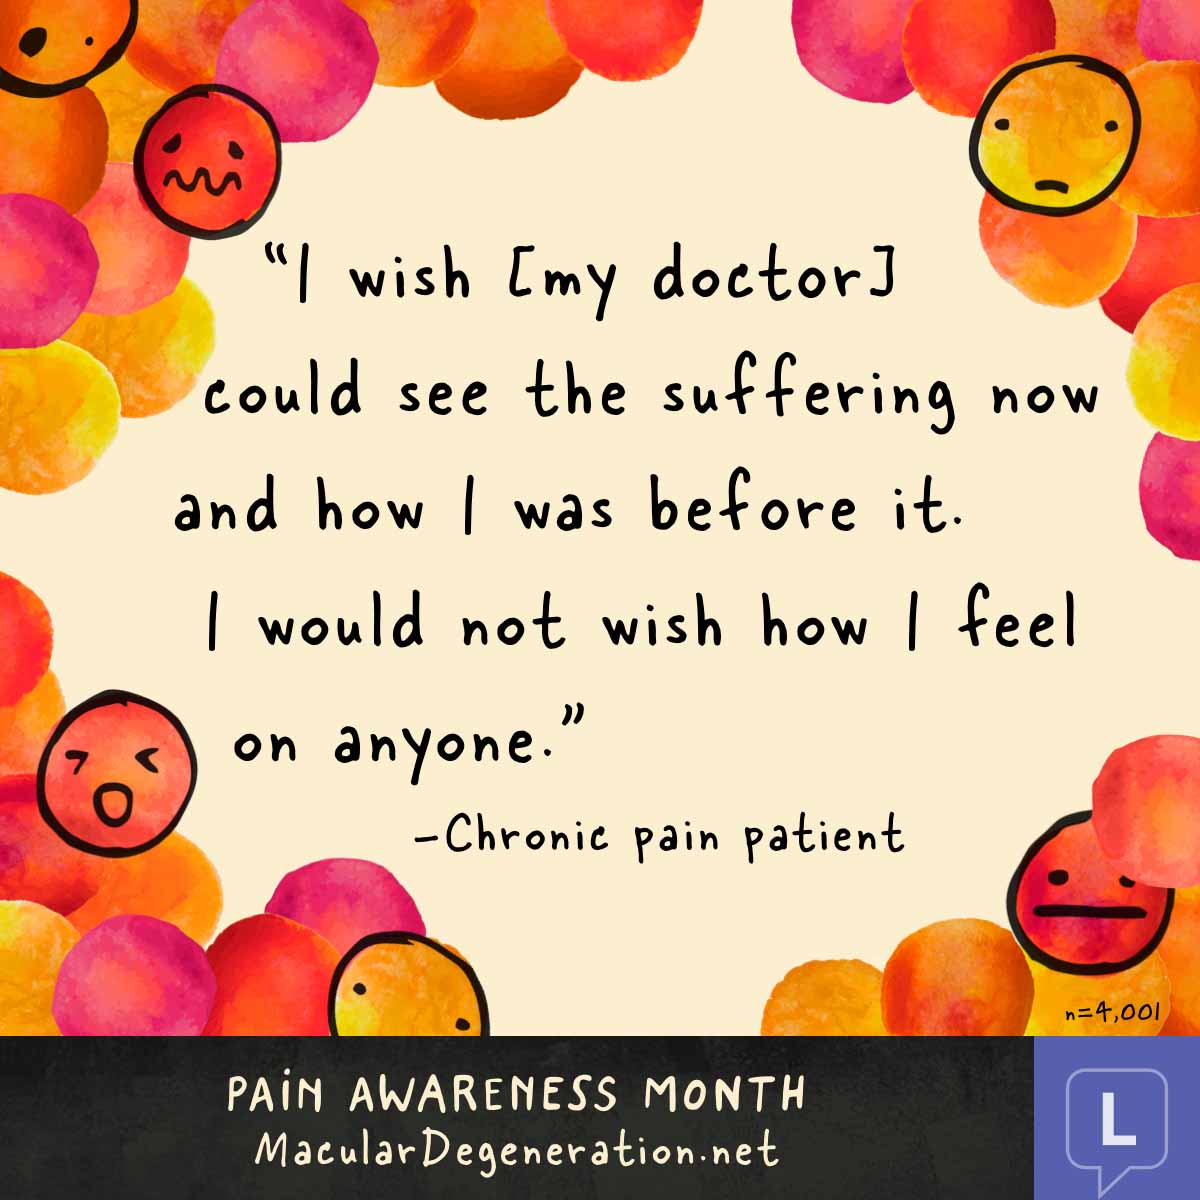 Quote: I wish my doctor could see the suffering now and how I was before it. I would not wish how I feel on anyone